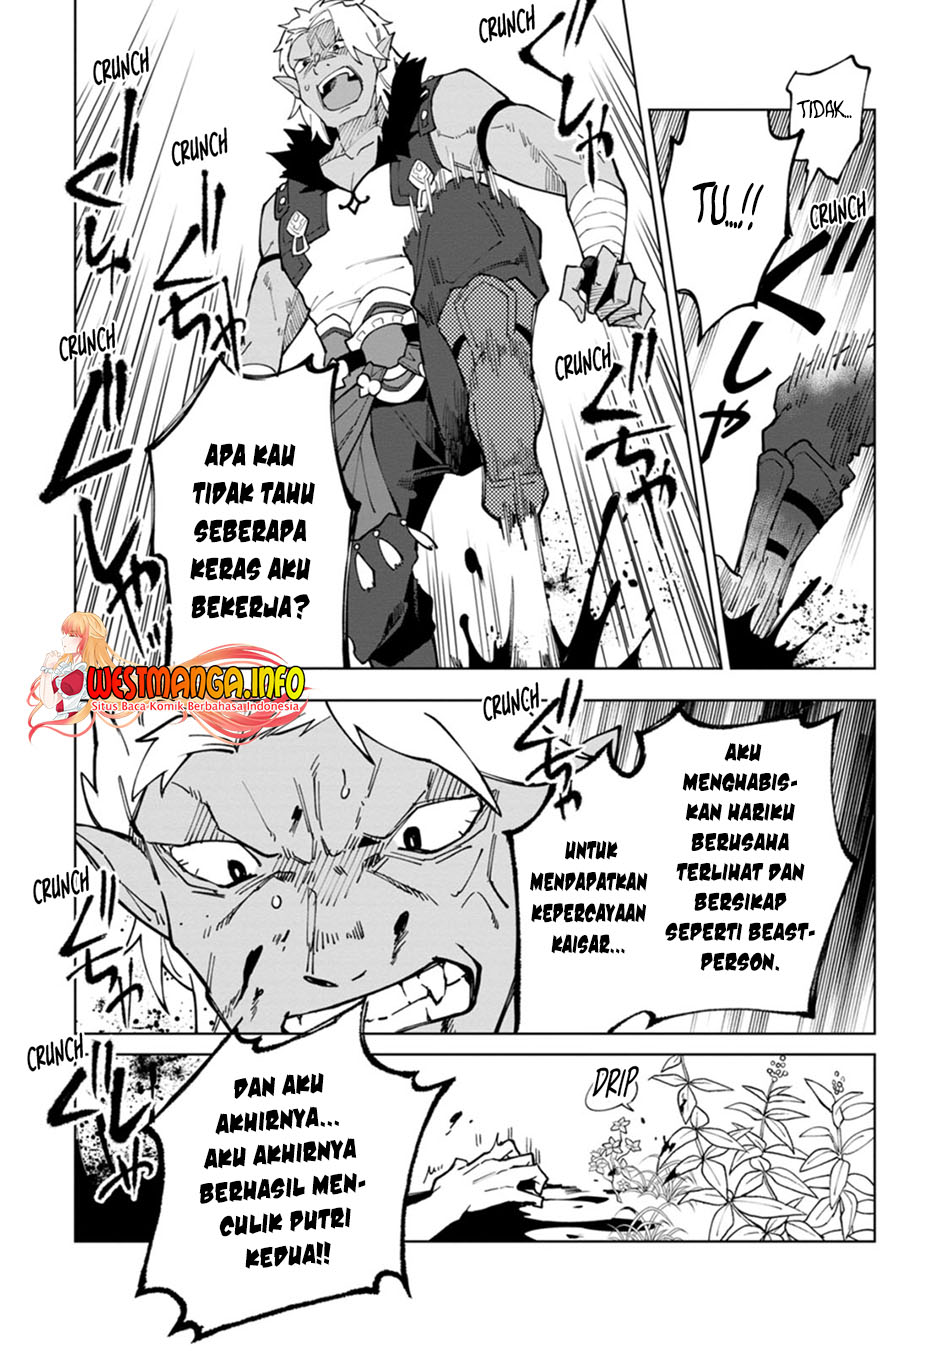 The White Mage Who Was Banished From the Hero’s Party Is Picked up by an S Rank Adventurer ~ This White Mage Is Too Out of the Ordinary! Chapter 10